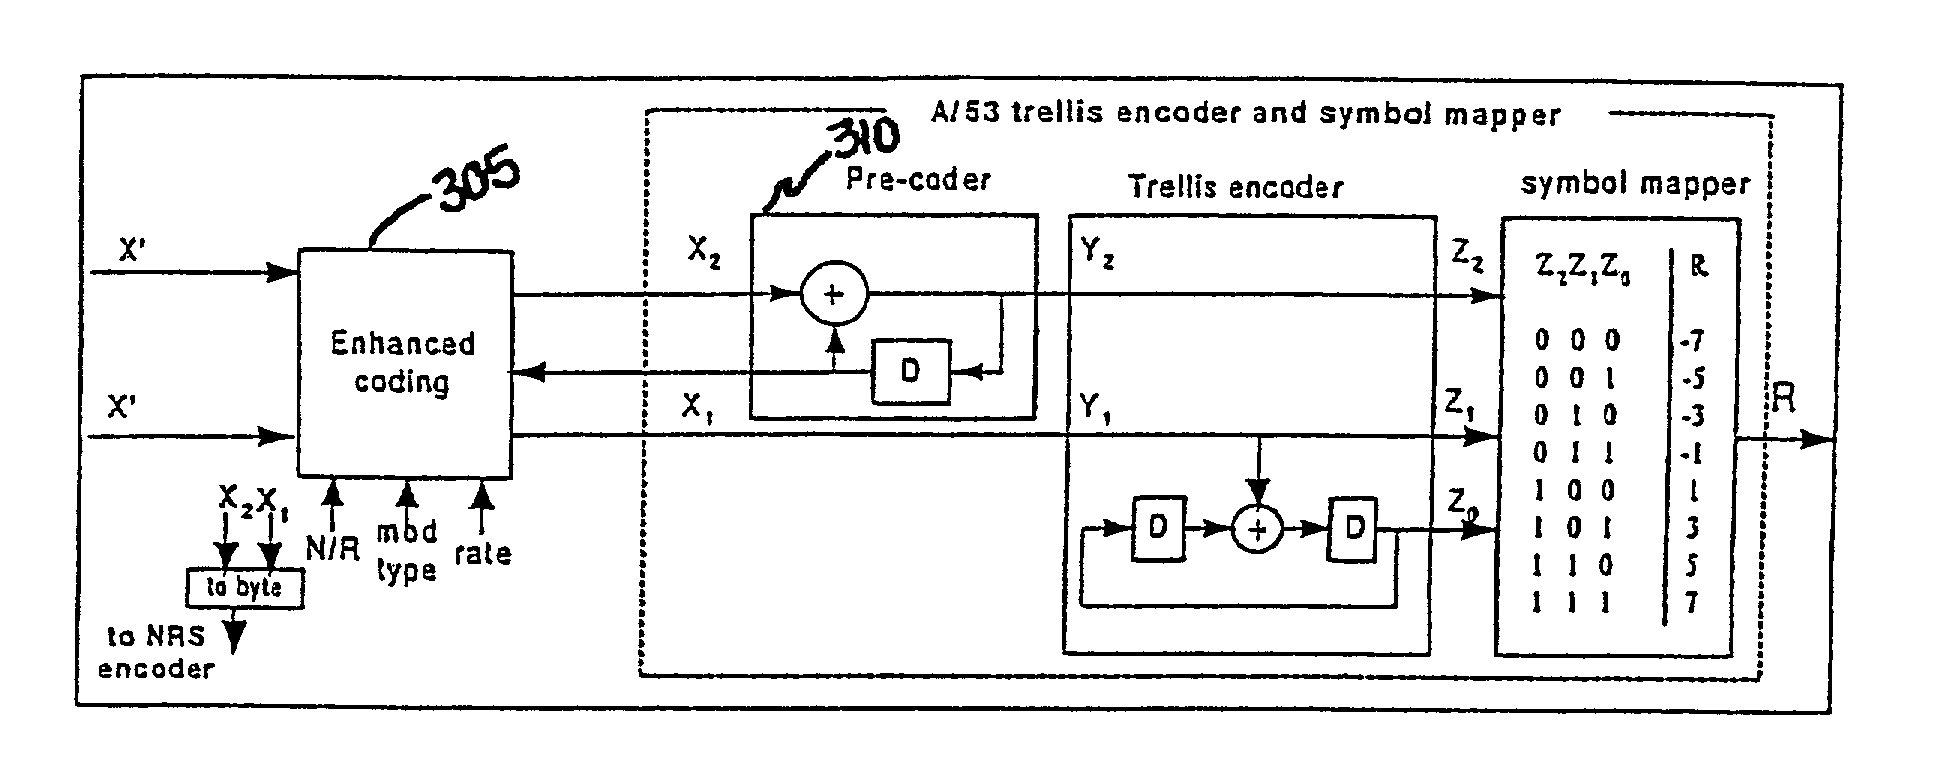 Trellis encoder with rate 1/4 and 1/2 for a backward compatible robust encoding ATSC DTV transmission system